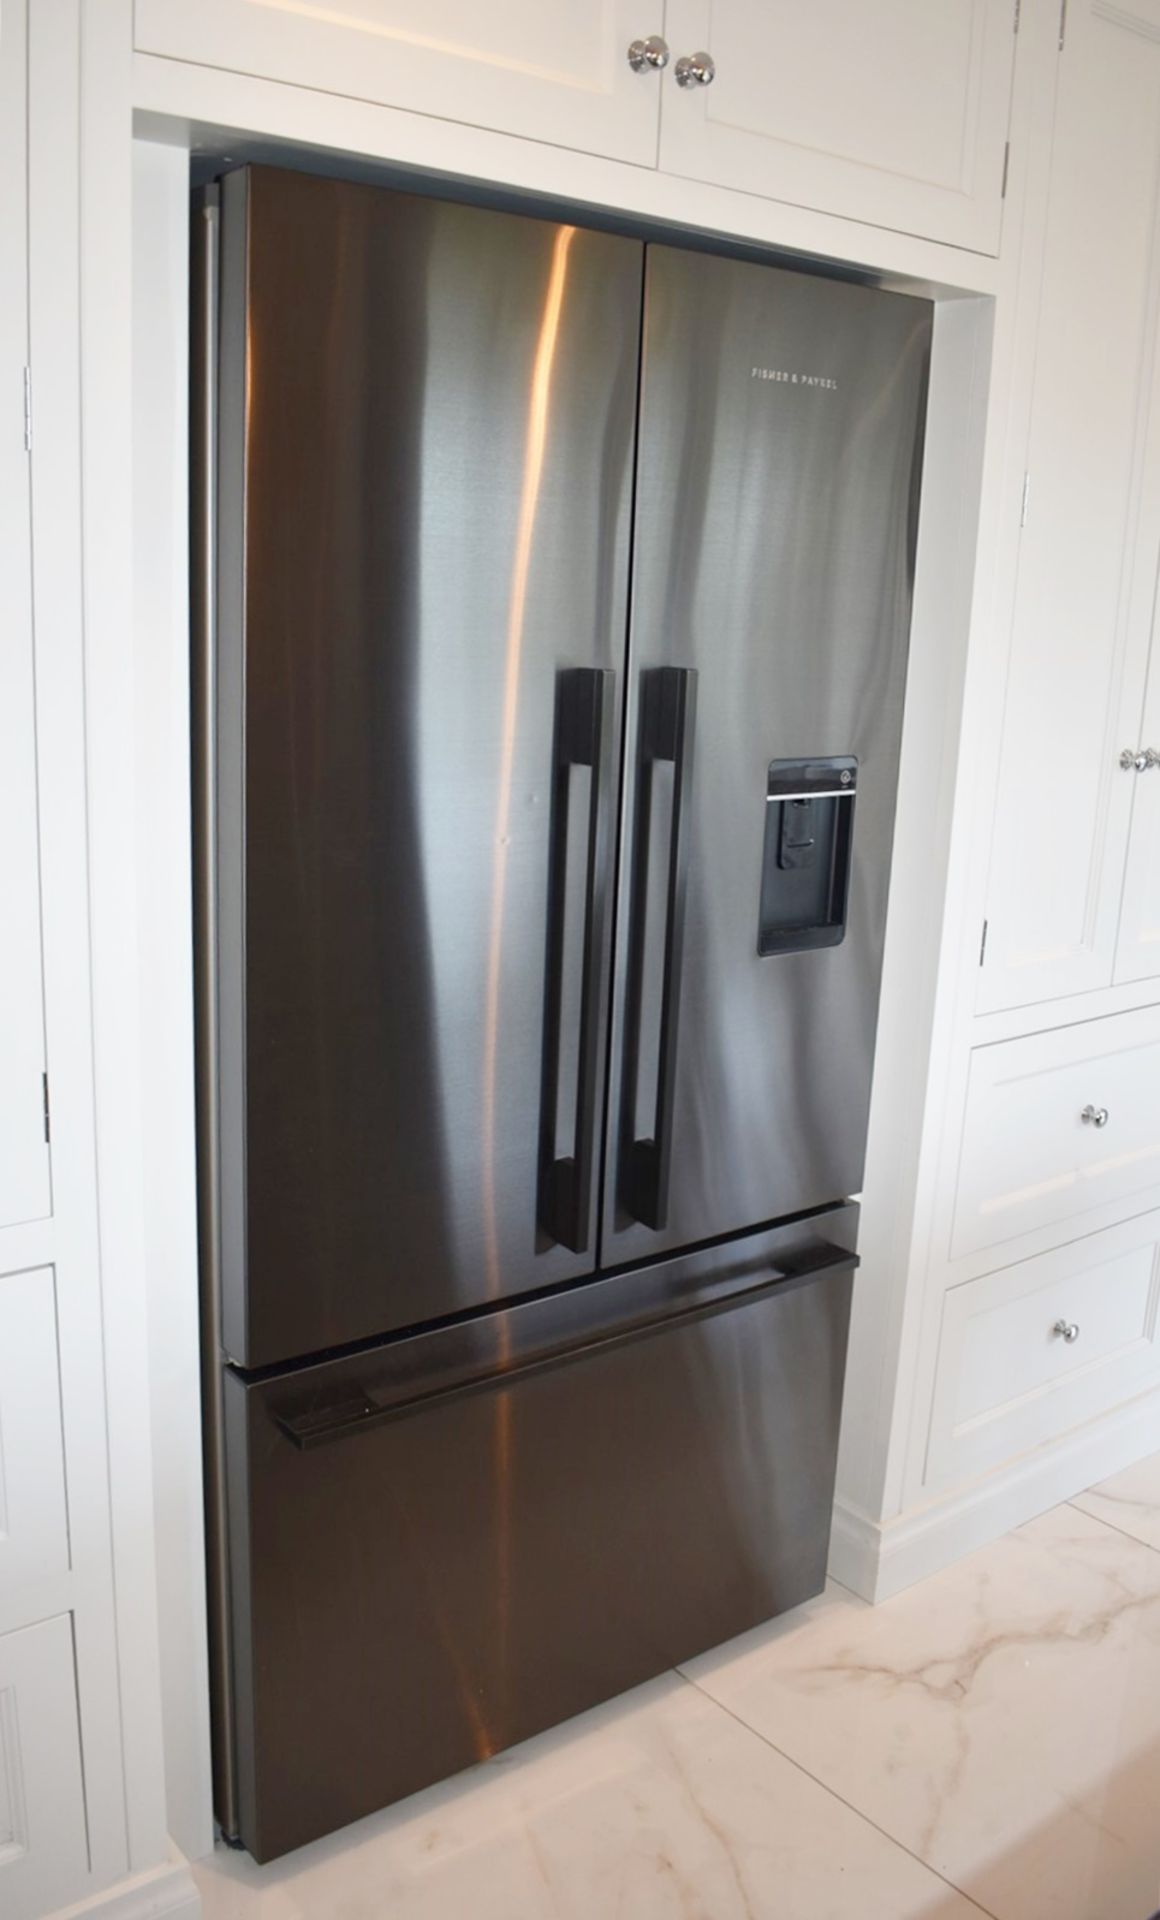 1 x Fisher & Paykel Goliath American Style Fridge Freezer With Ice and Water Dispenser - Model